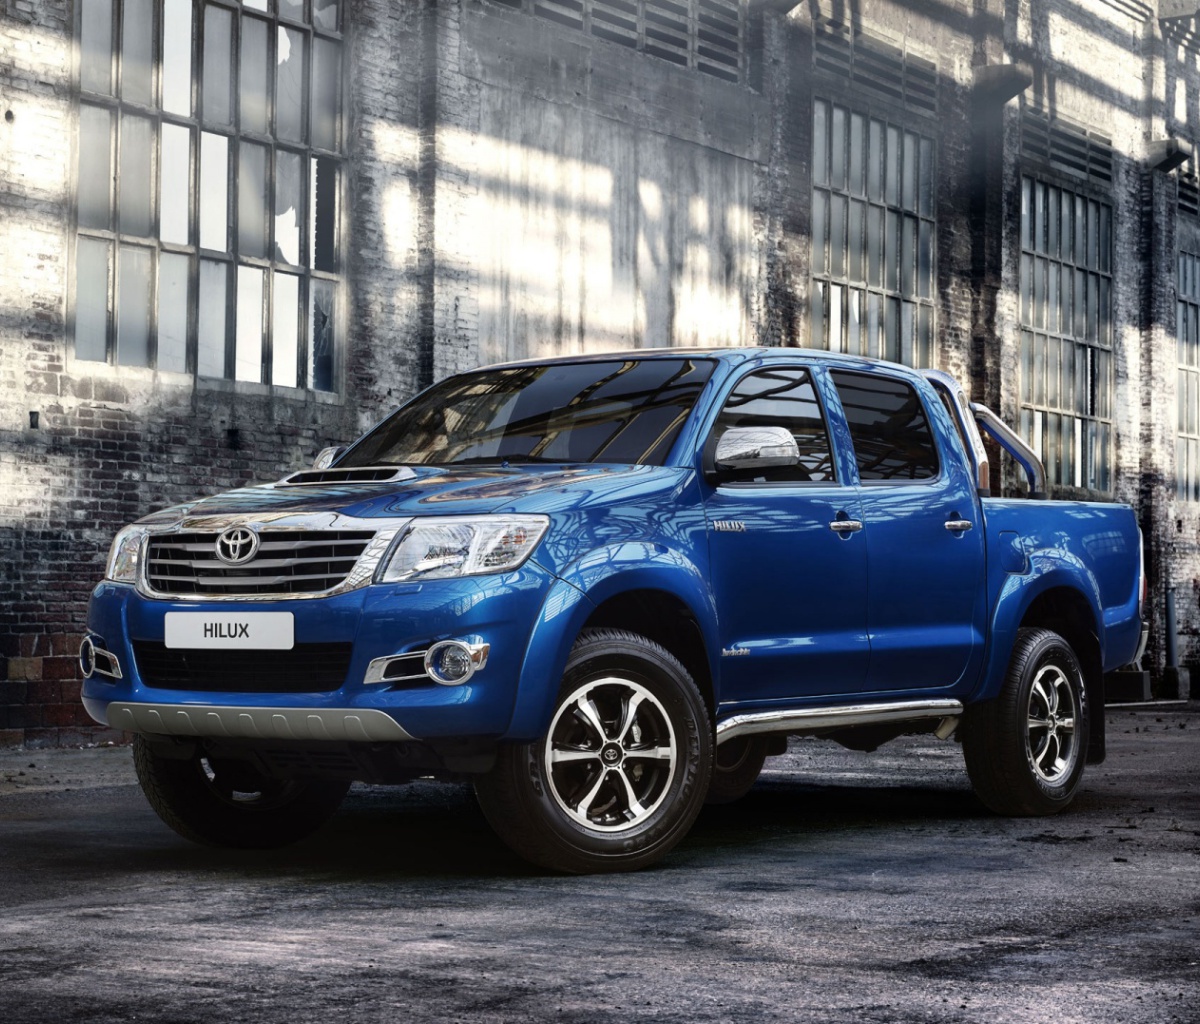 Toyota Hilux HDR wallpaper 1200x1024